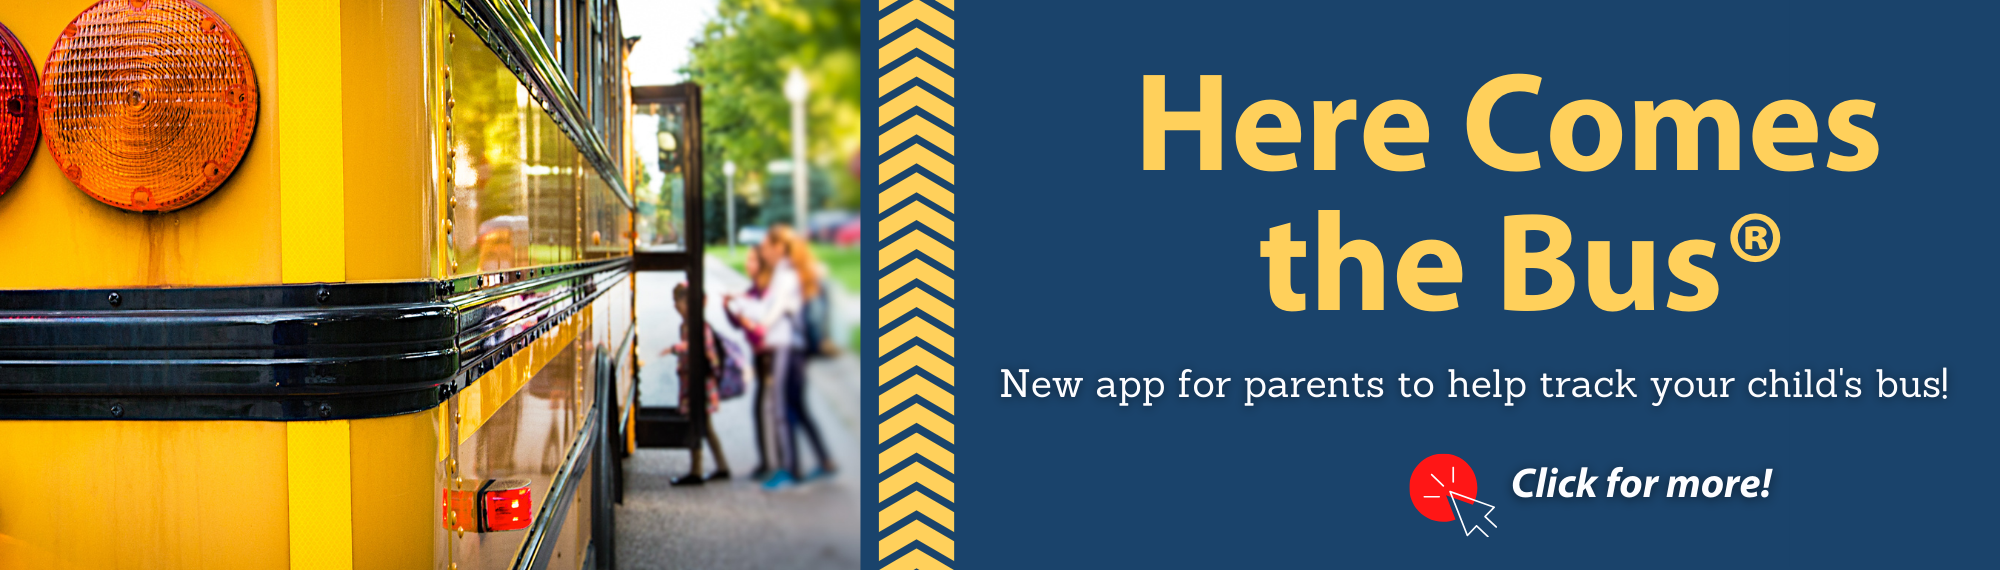 Here Comes The Bus - New app for parents to help track your child's bus!  Click for more. 